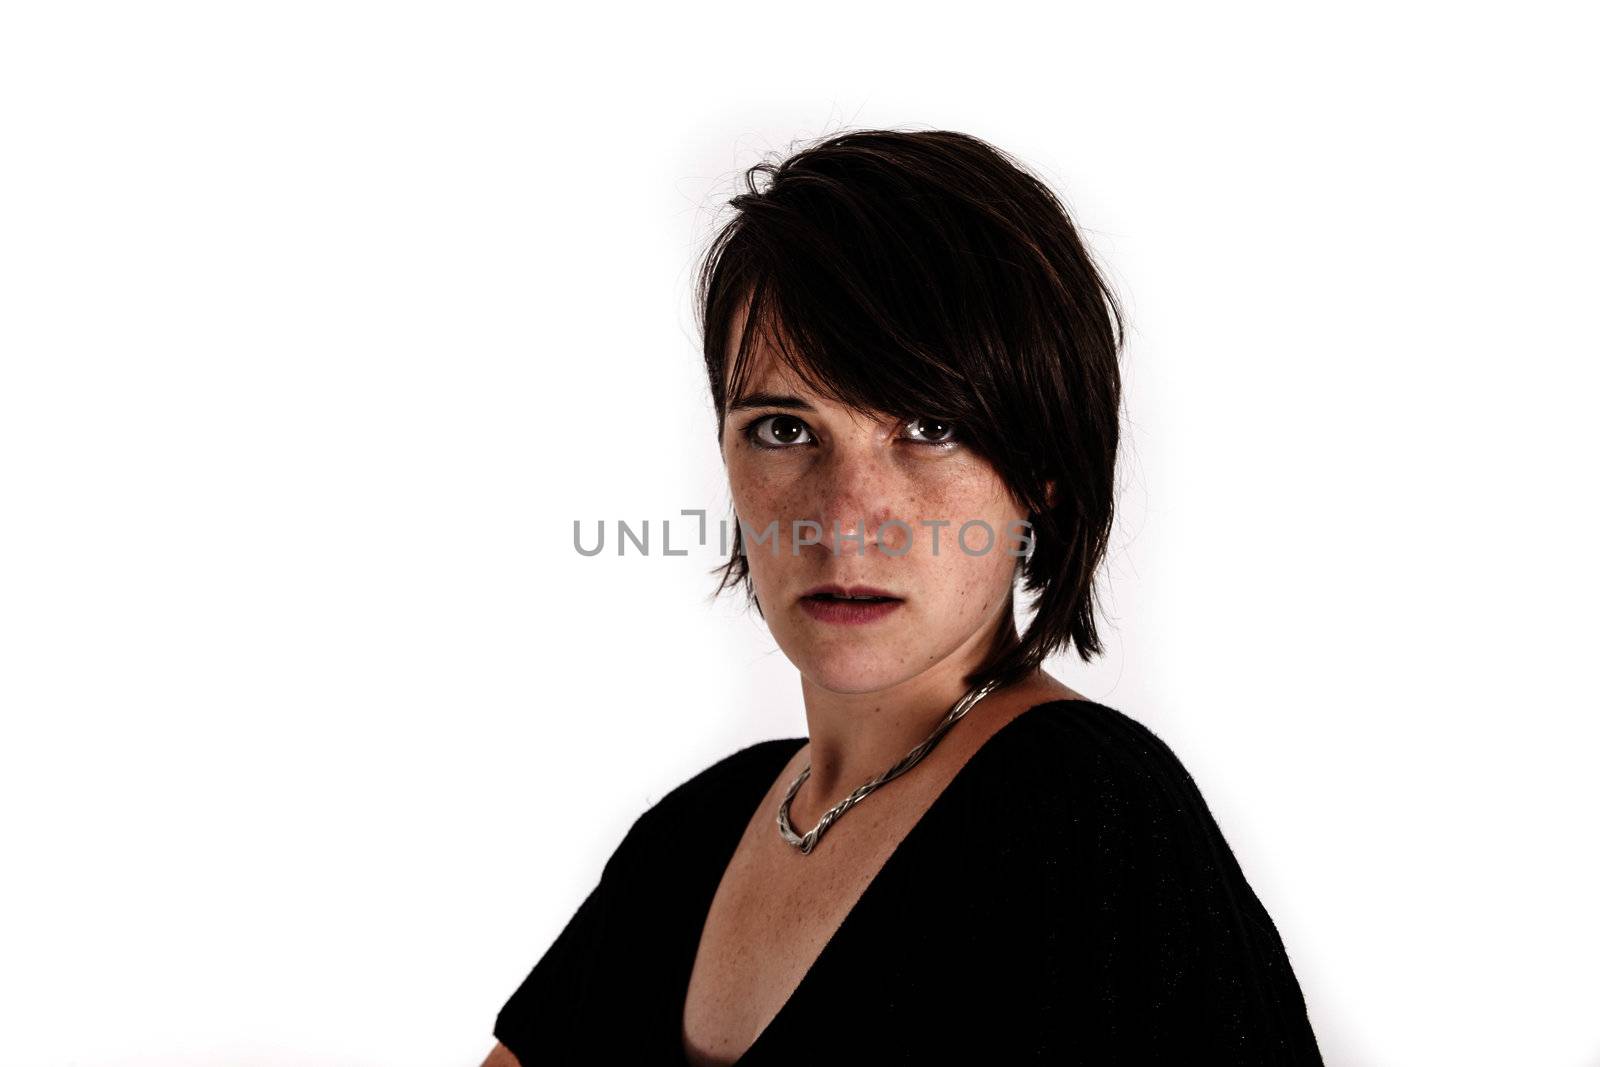 variation of expression on the face of a young brunette woman in studio with a colored scarf